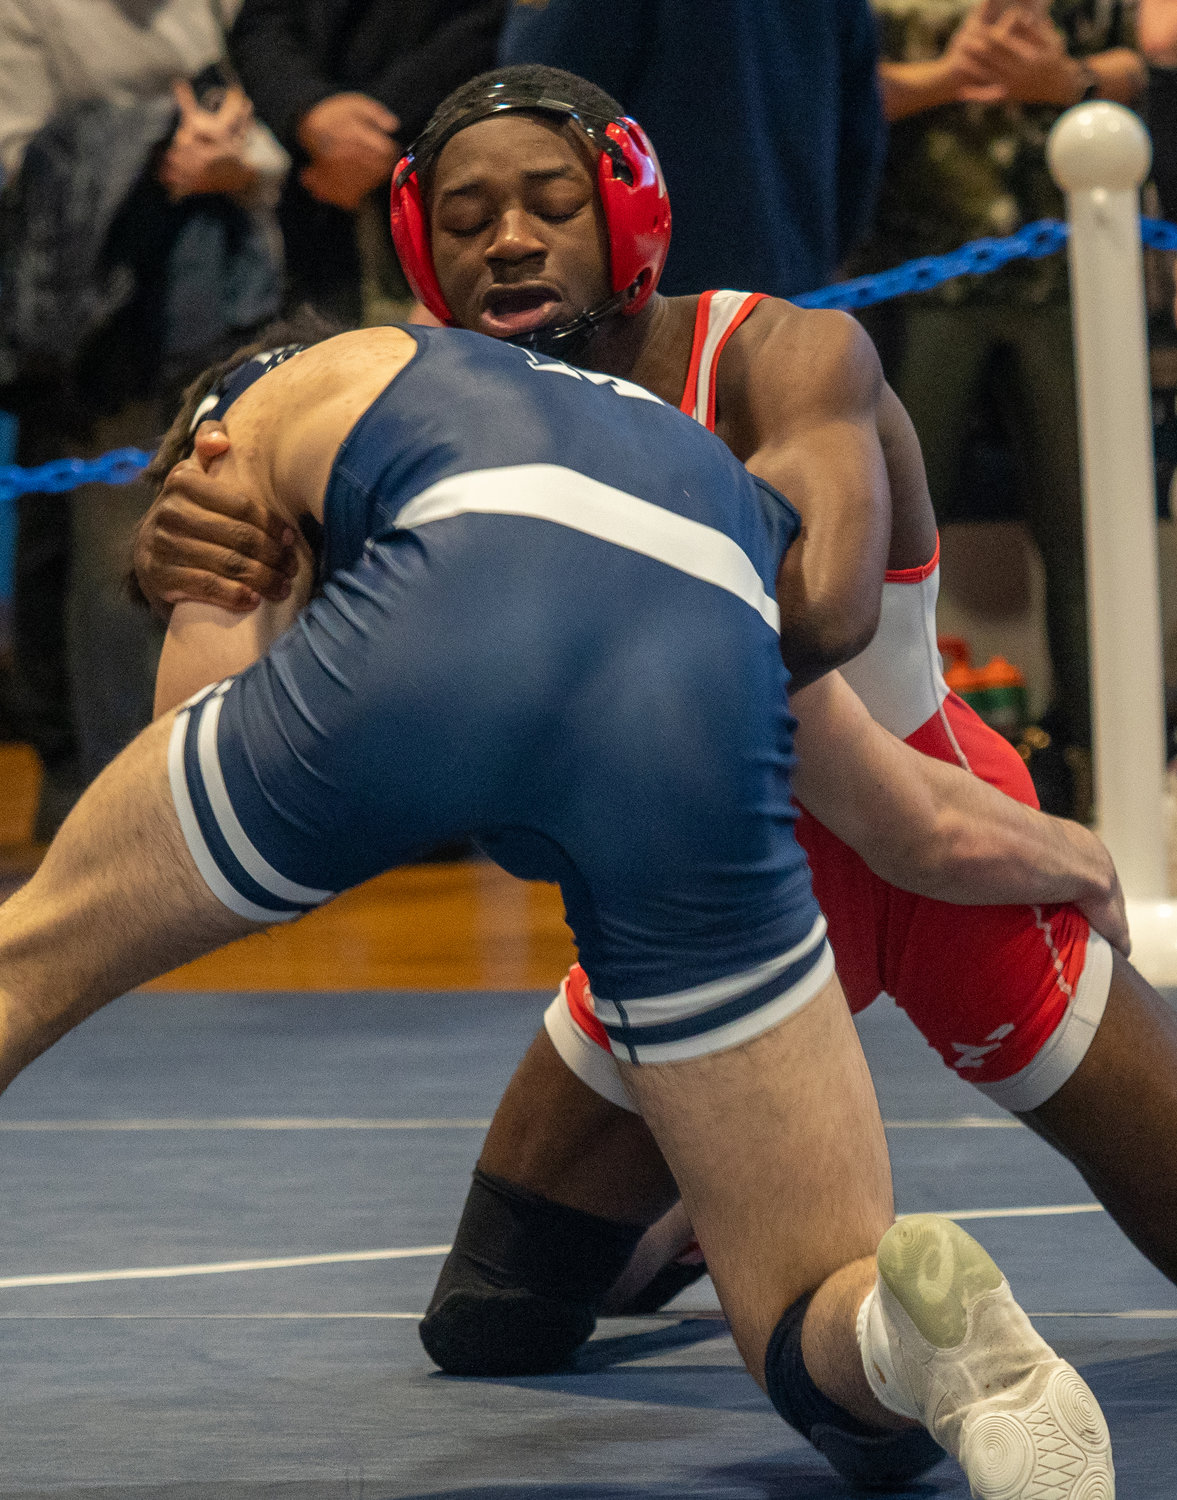 Freeport senior Amir Levy earned his first trip to the county tournament with a solid effort at last Saturday’s qualifier.